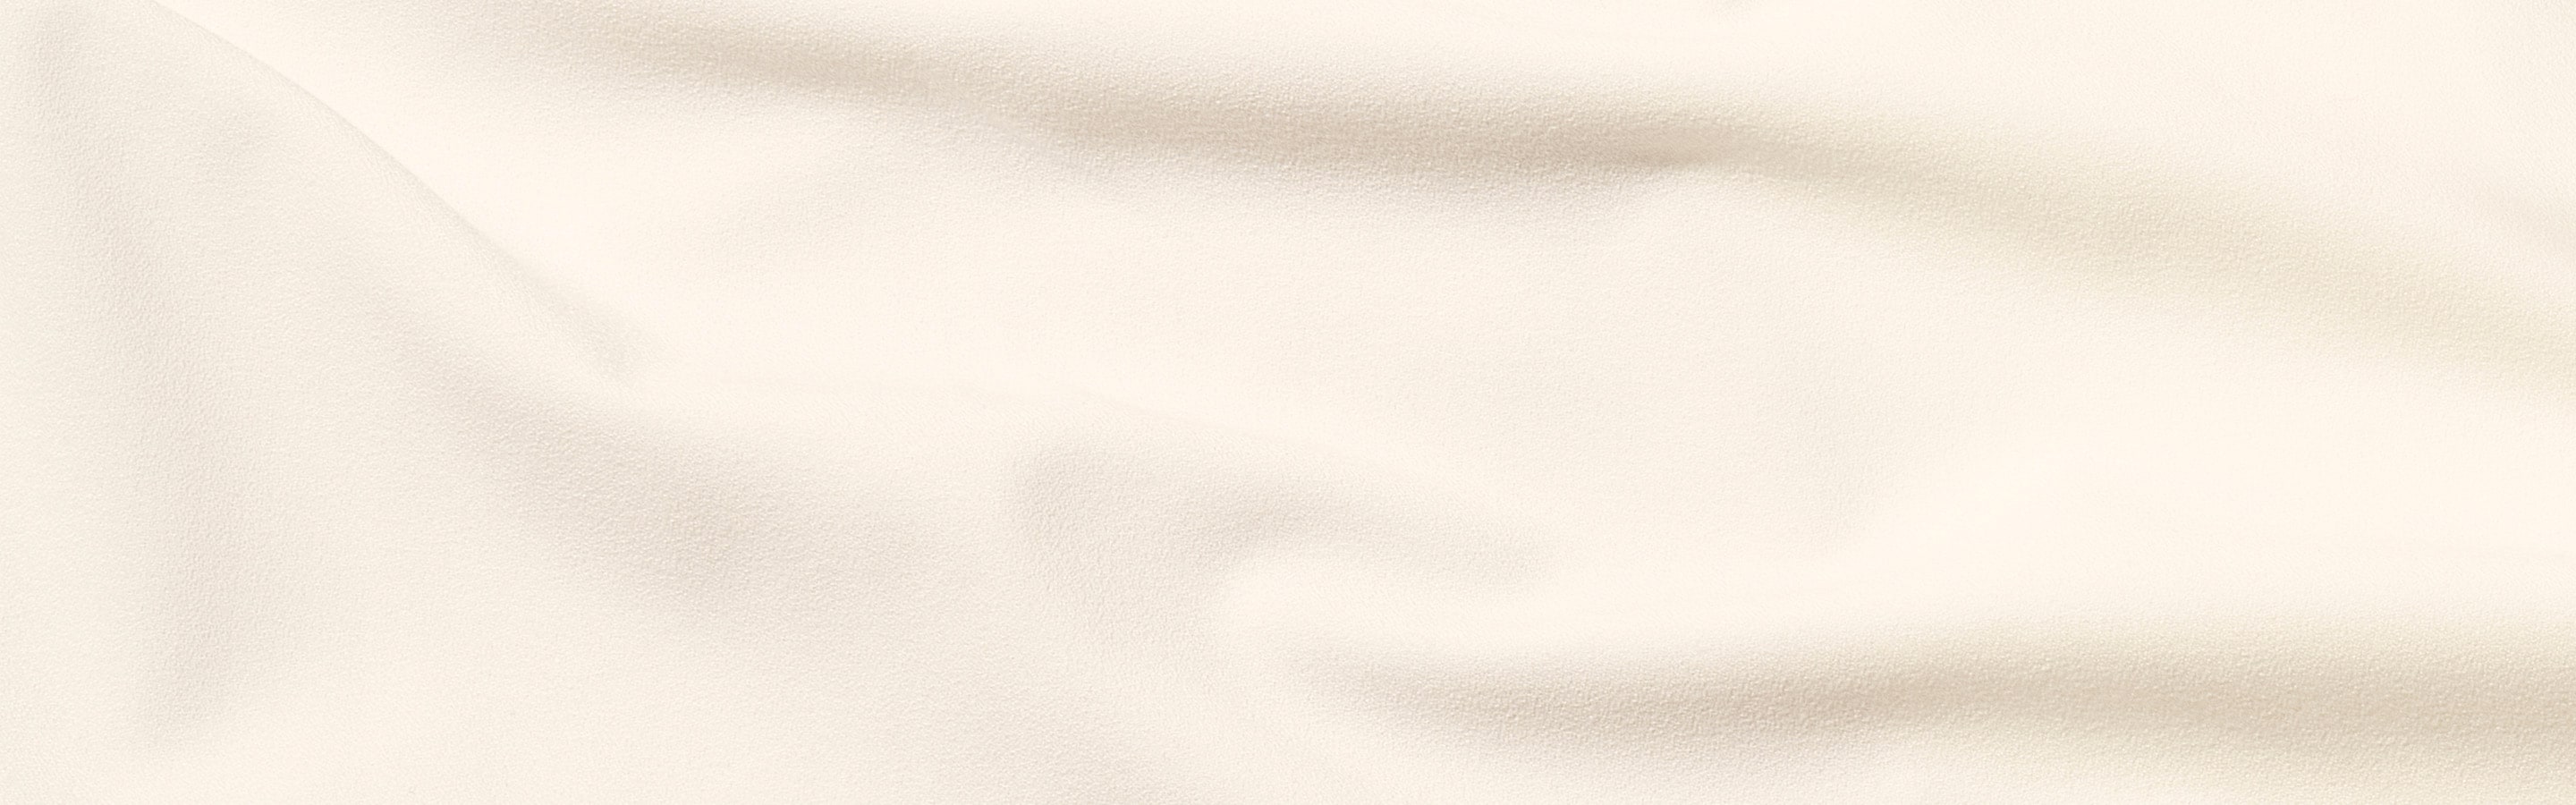 Cream linen bed sheets background image